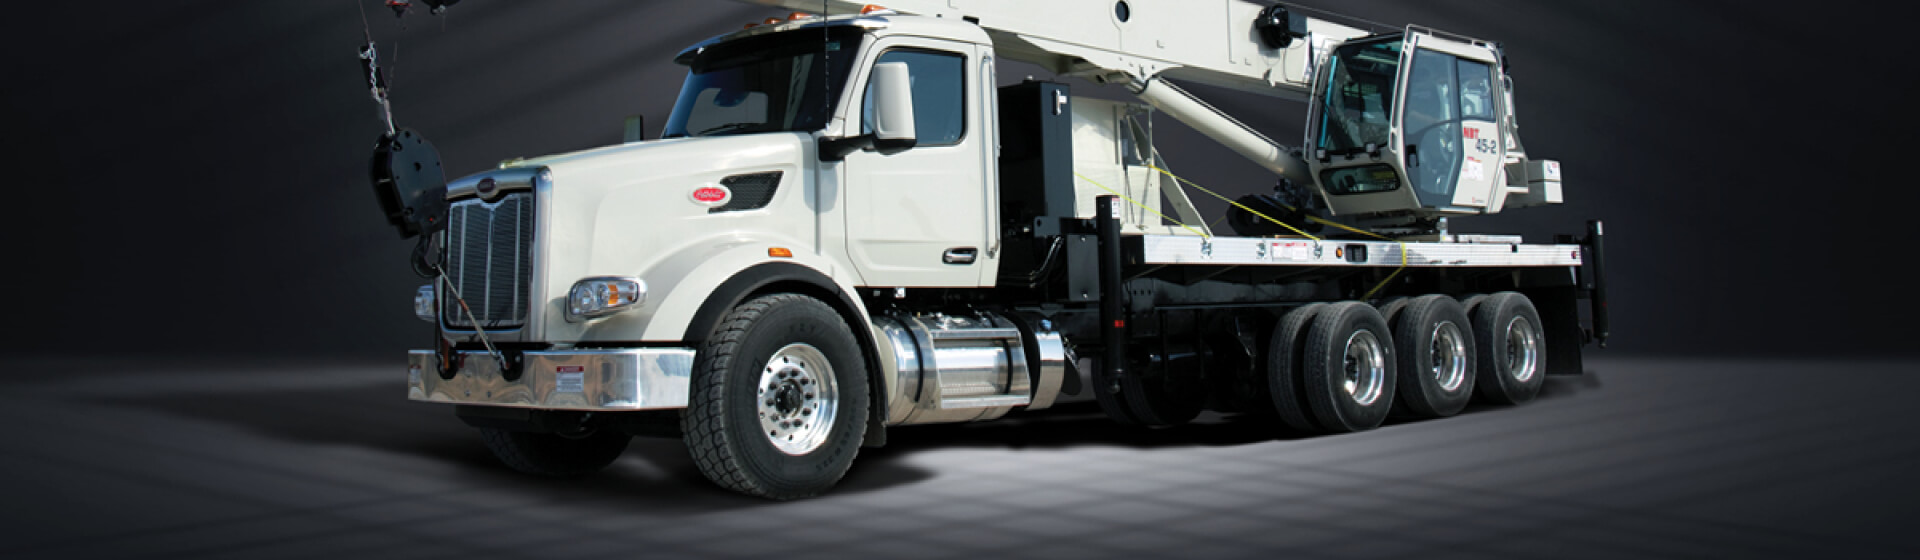 National Crane to show agile configuration of NBT45-2 at Work Truck Week  2023 | Manitowoc